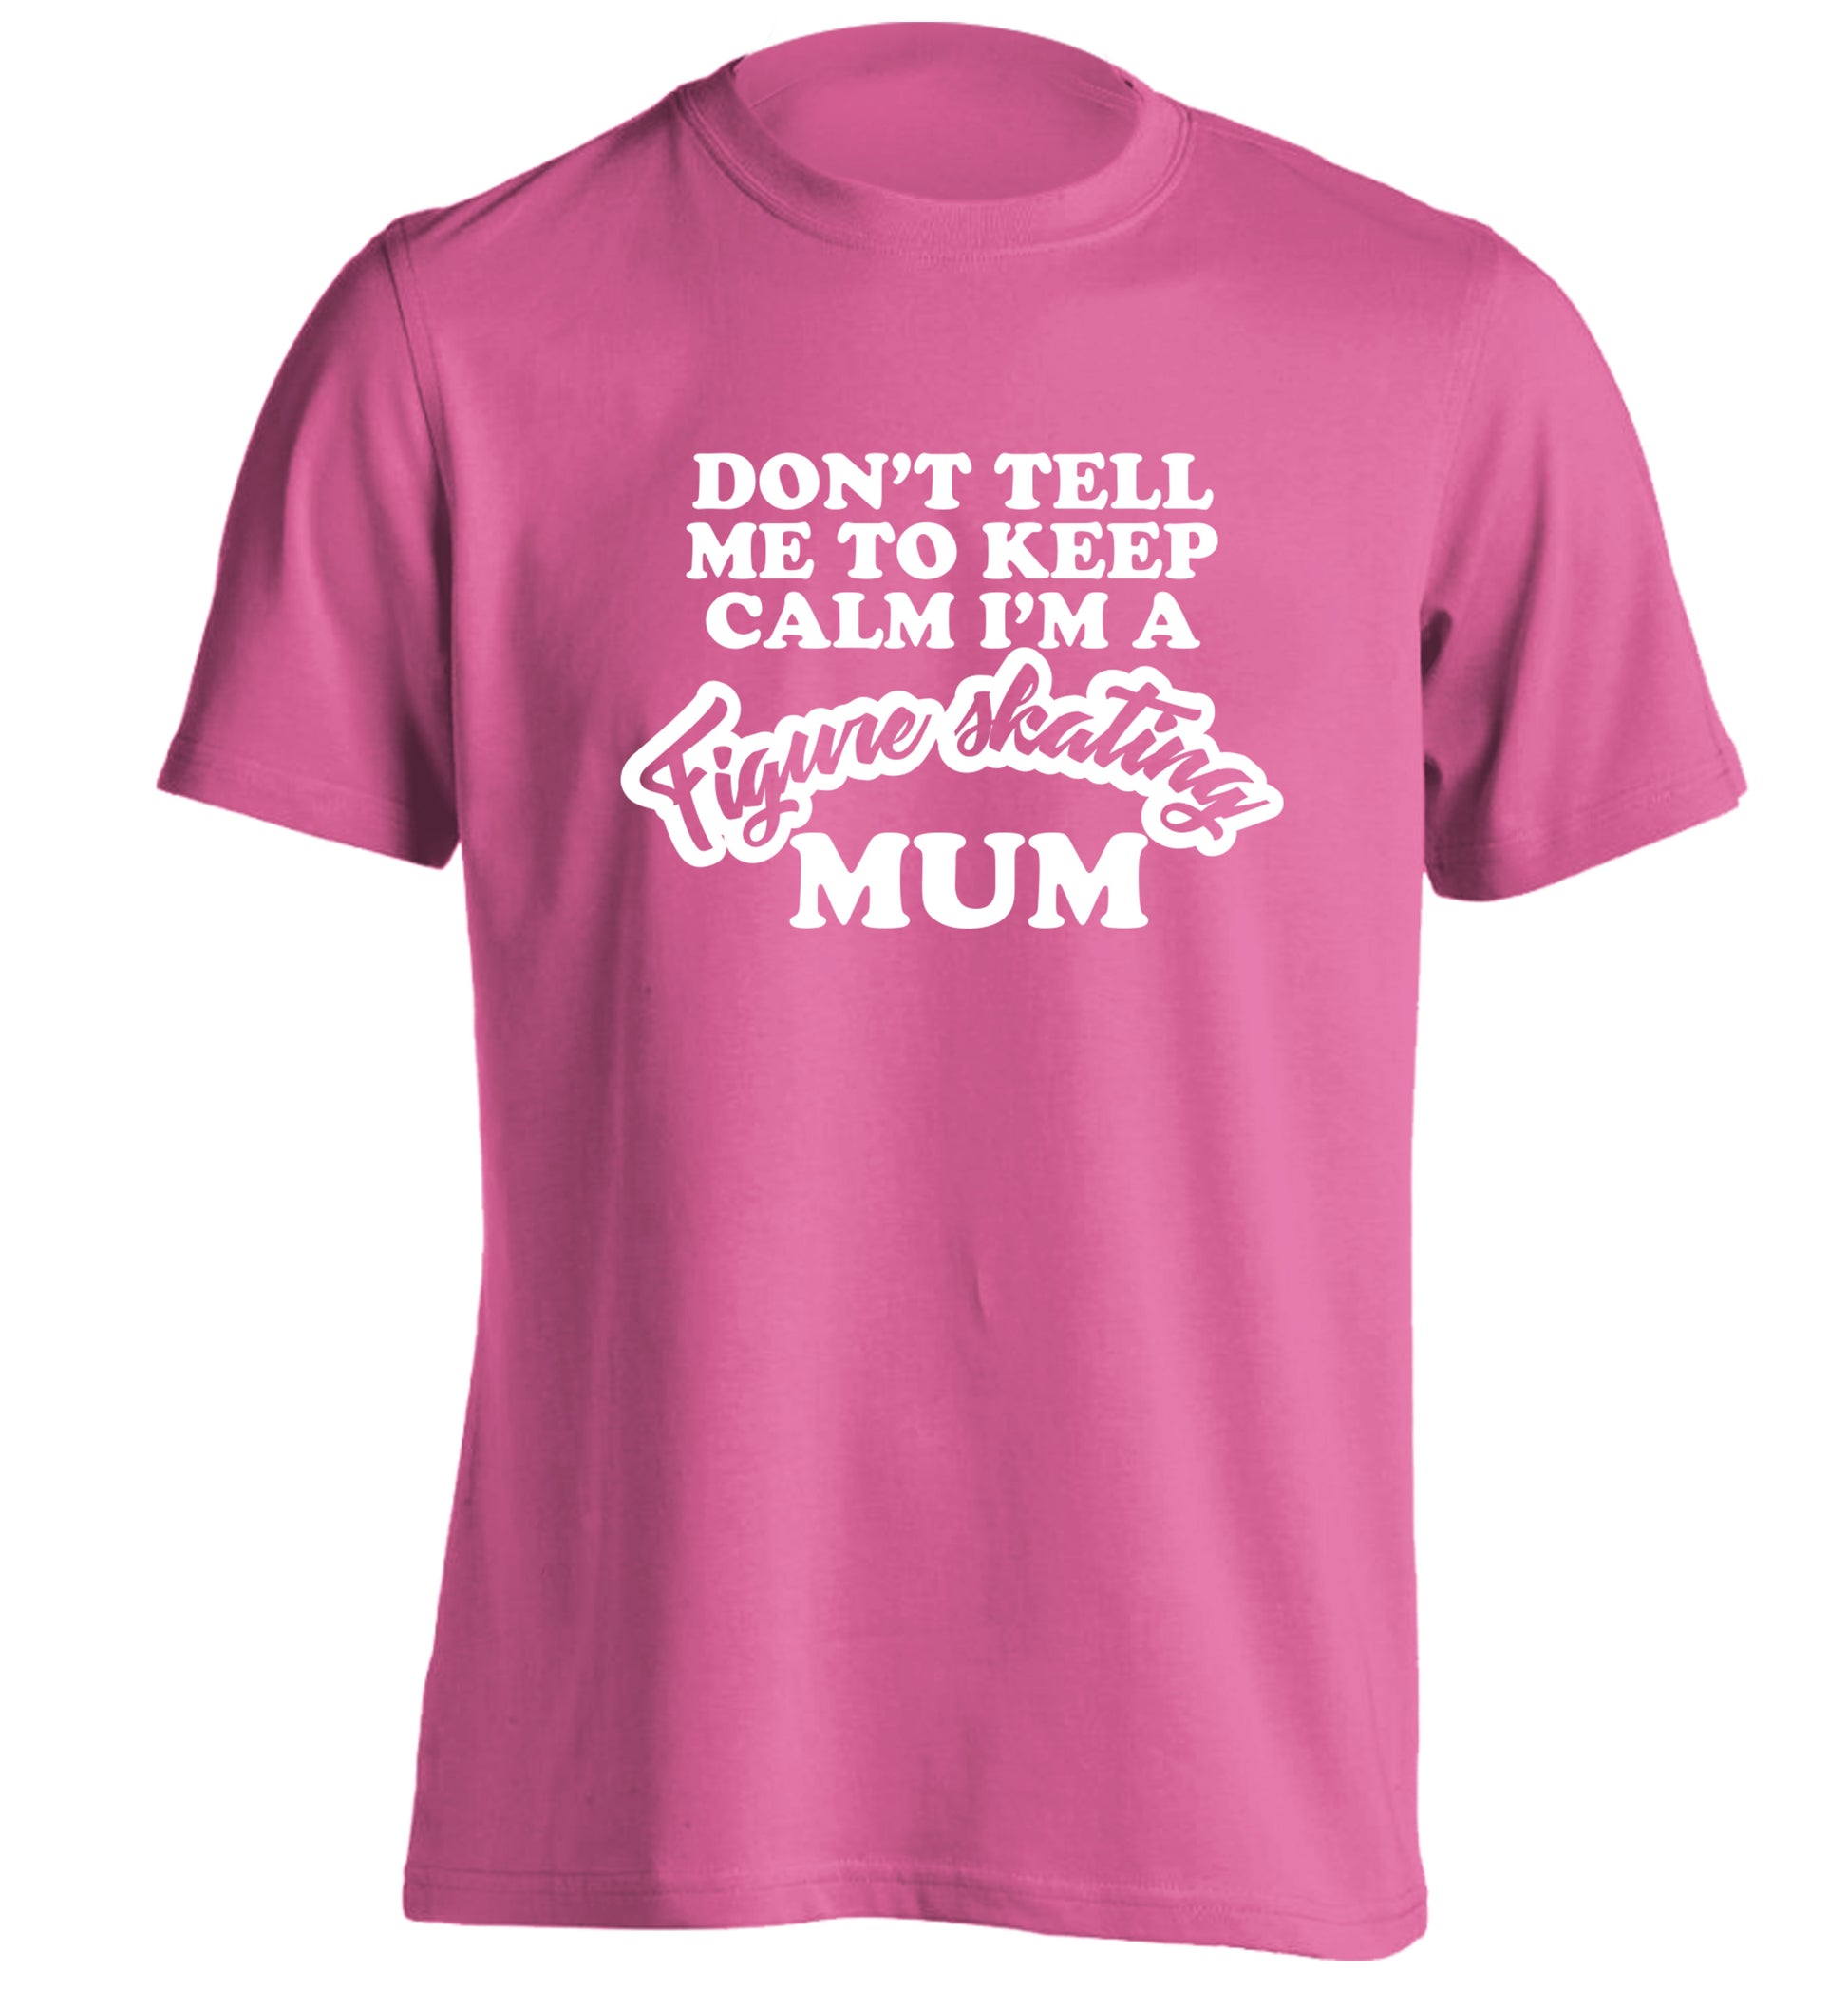 Don't tell me to keep calm I'm a figure skating mum adults unisexpink Tshirt 2XL